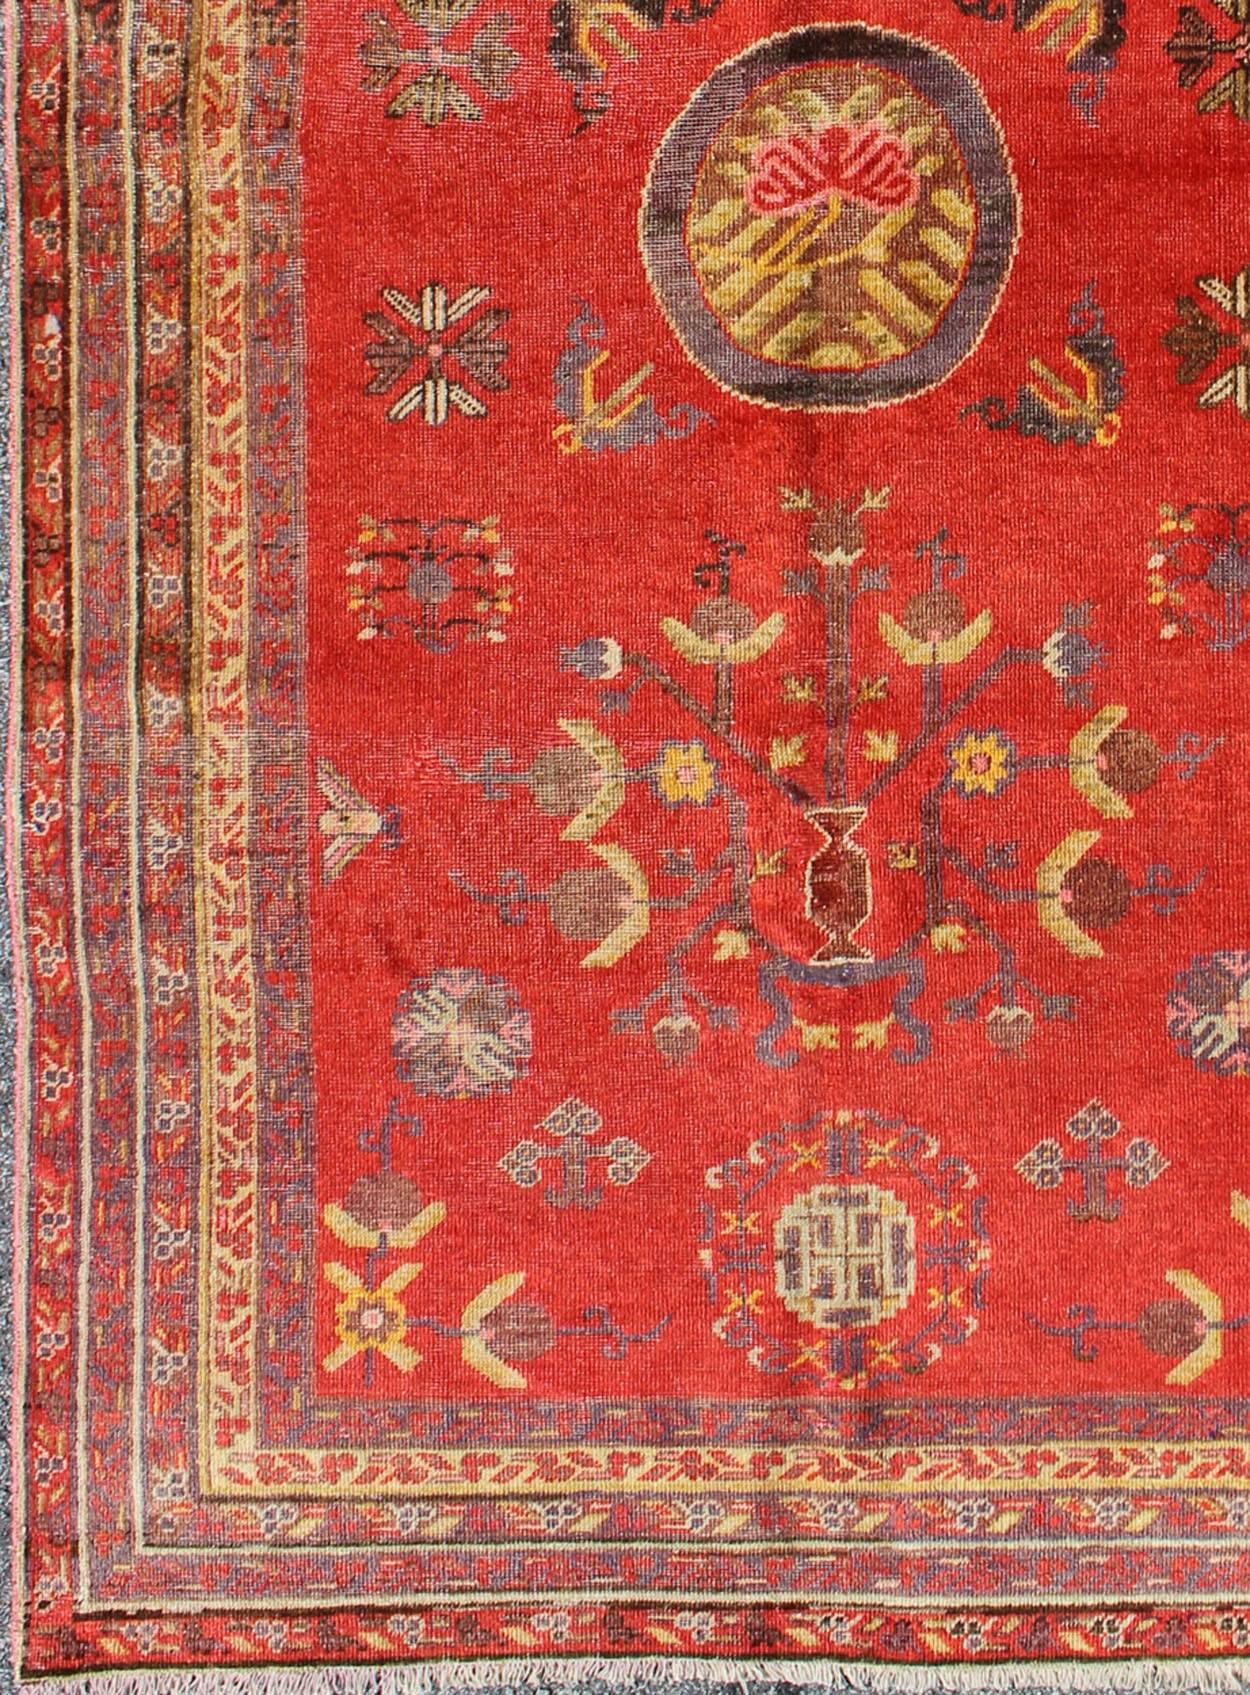 Measures: 4'1'' x 8'6''.
This attractive antique Khotan rug is a spectacular testament to the complexity of Turkestan design. The red of the central field plays host to a stunning display of the entwined tree of life bearing budding blossoms and